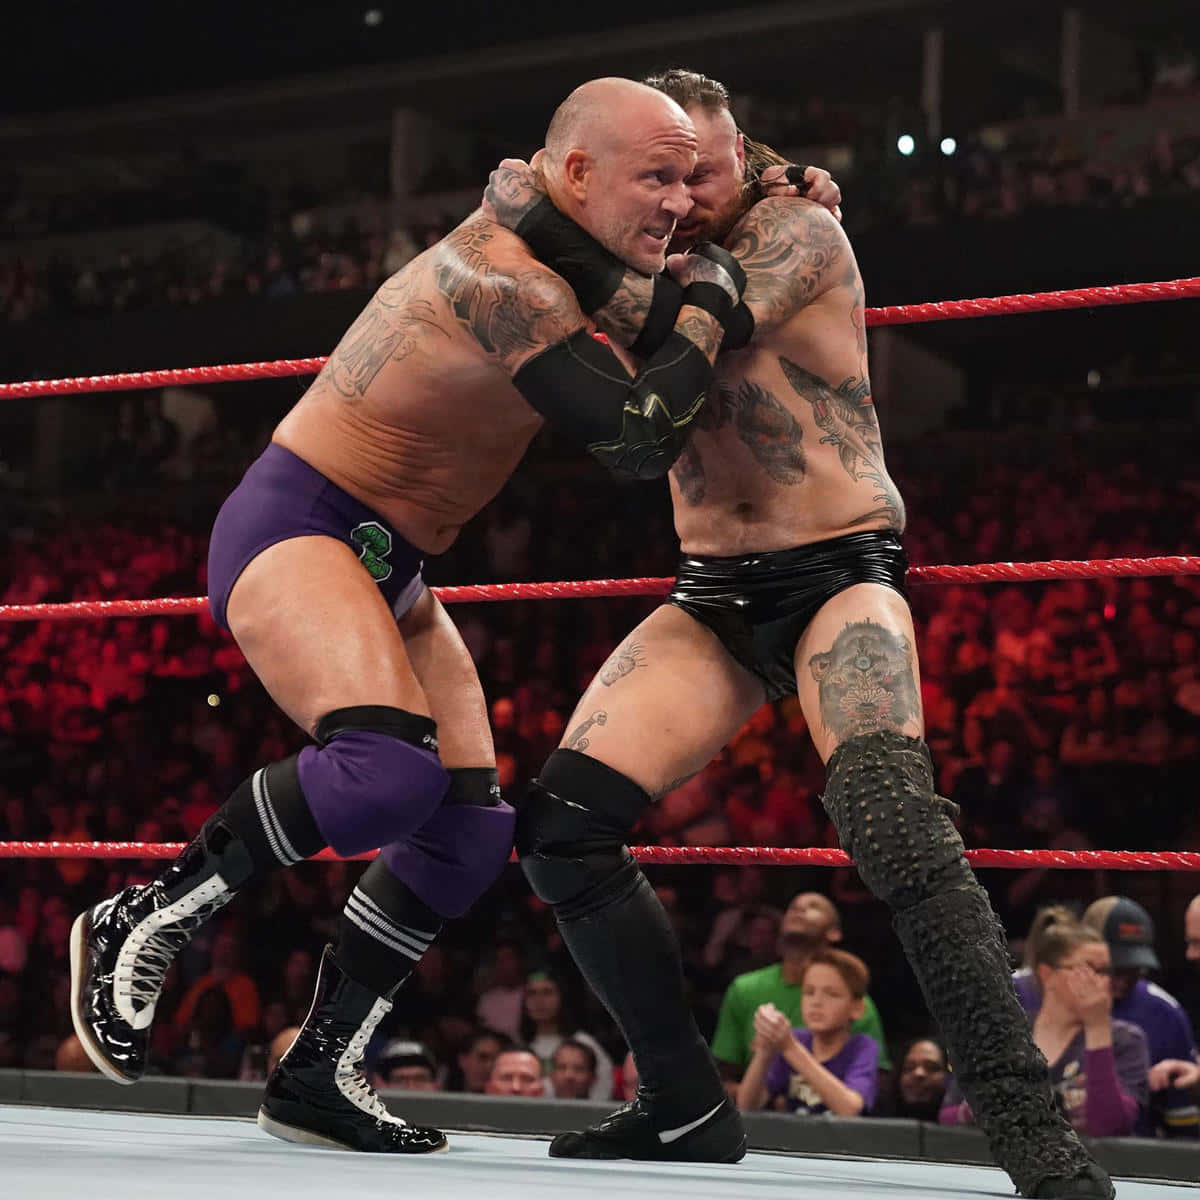 Eric Young Match Against Aleister Black Wallpaper